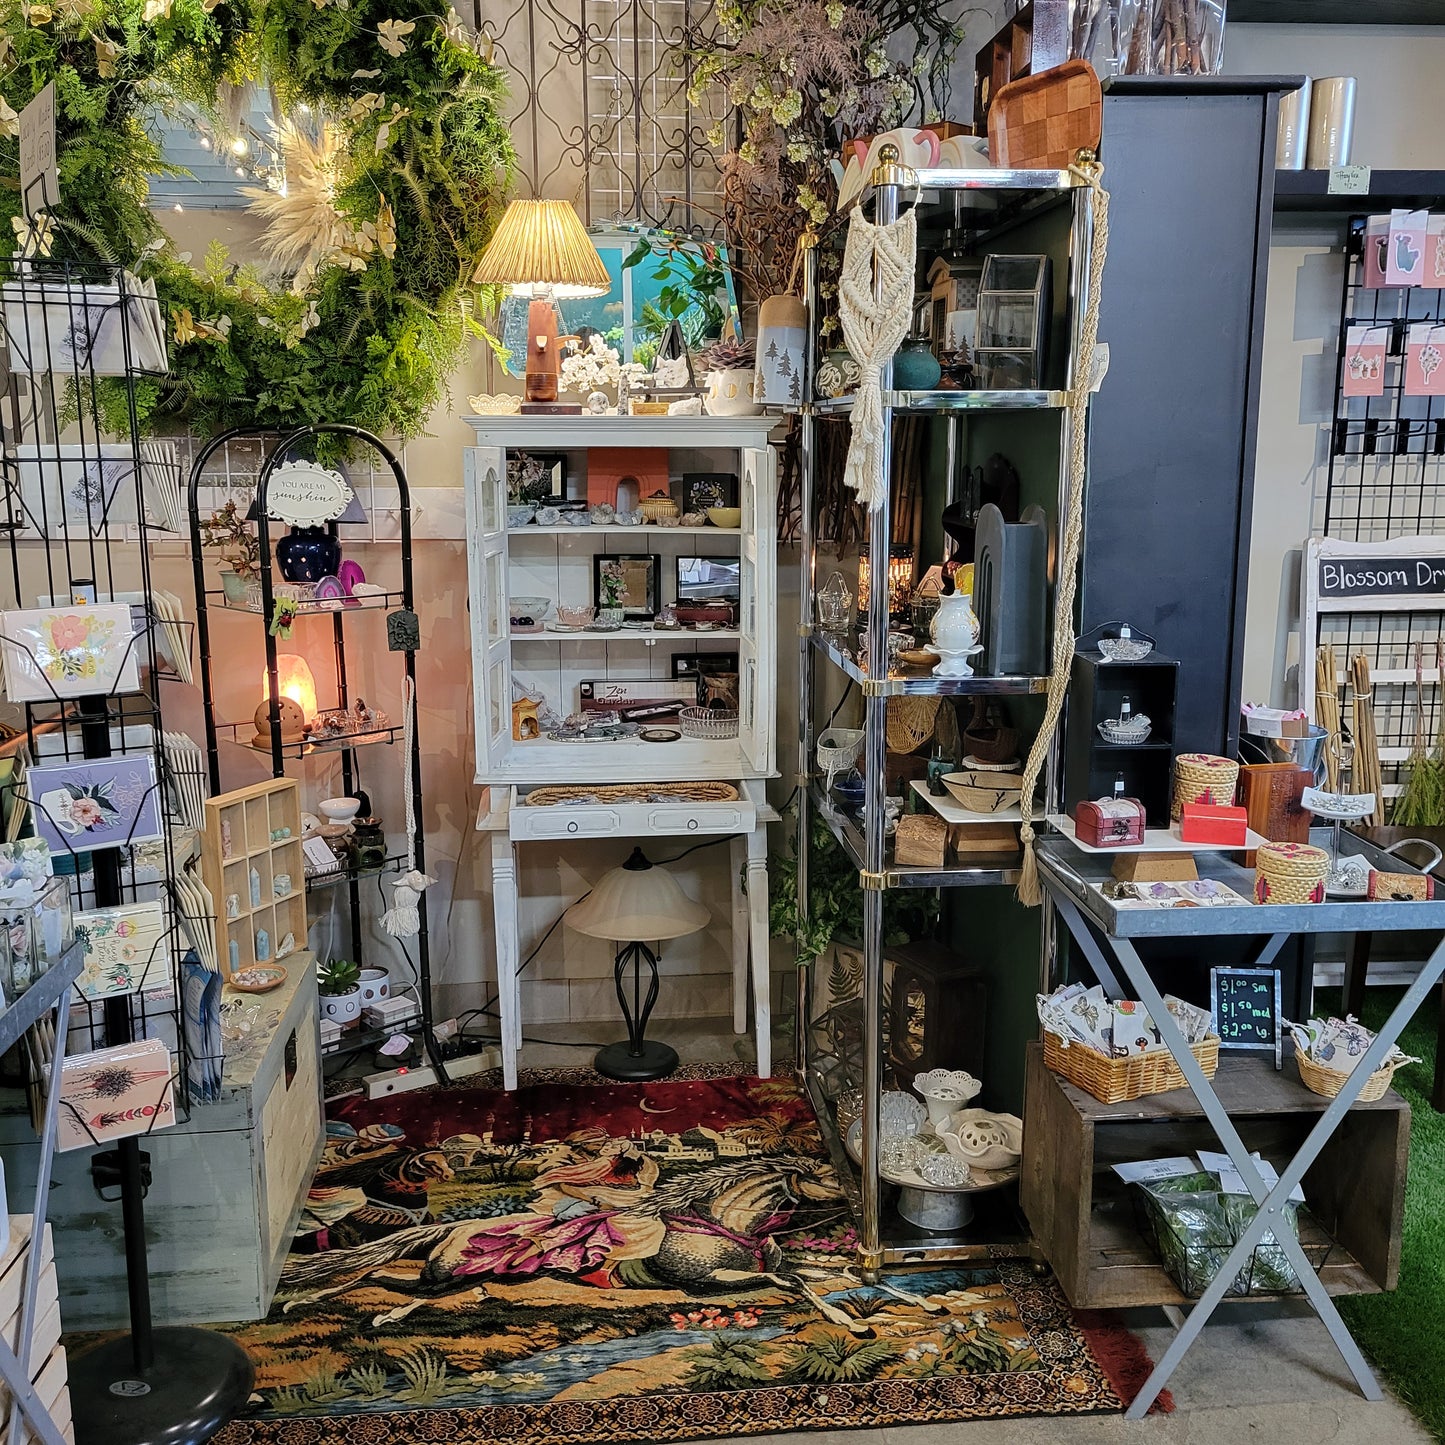 The Crystal Florist: Ava's Crystal, Local Product & Thrifted Gifts